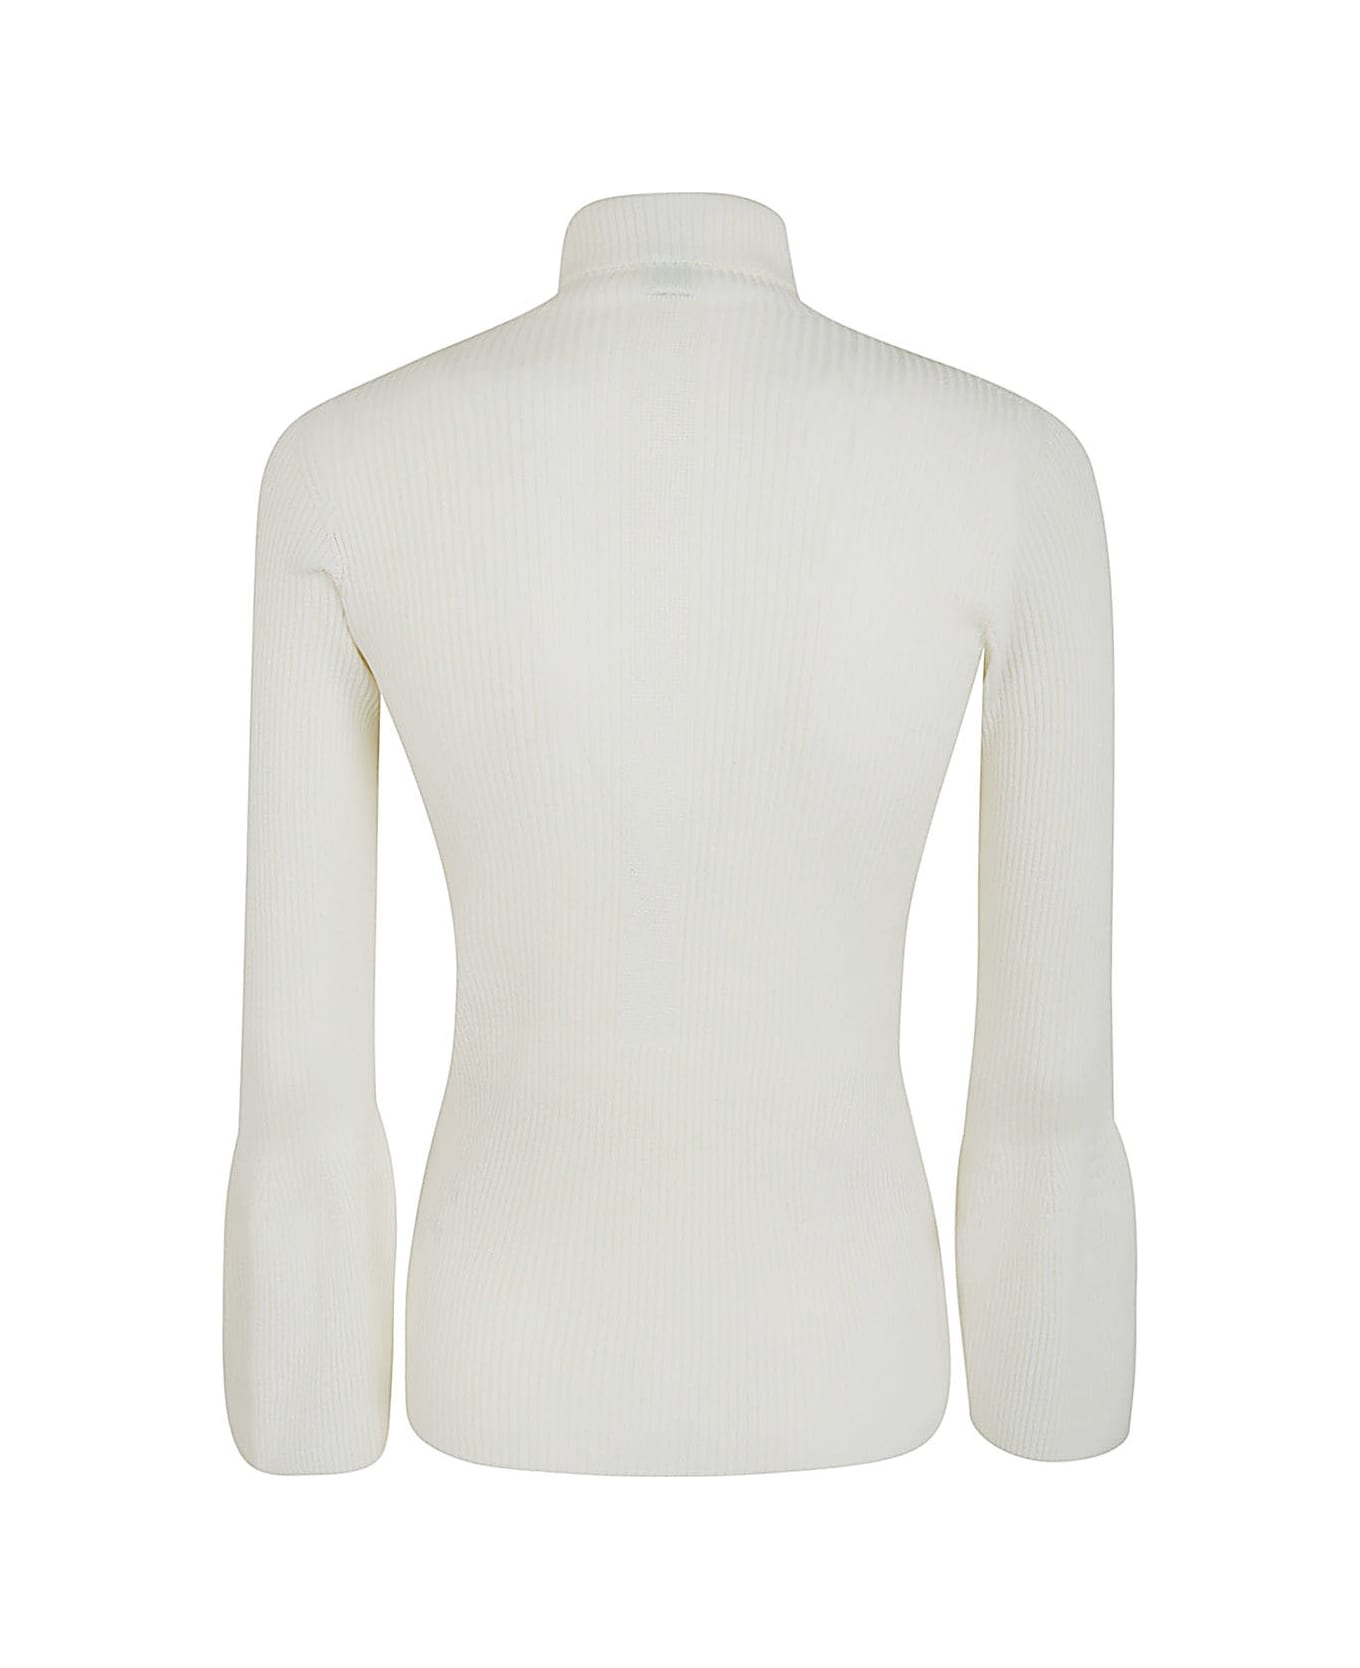 CFCL Rib Bell Sleeve Top - White